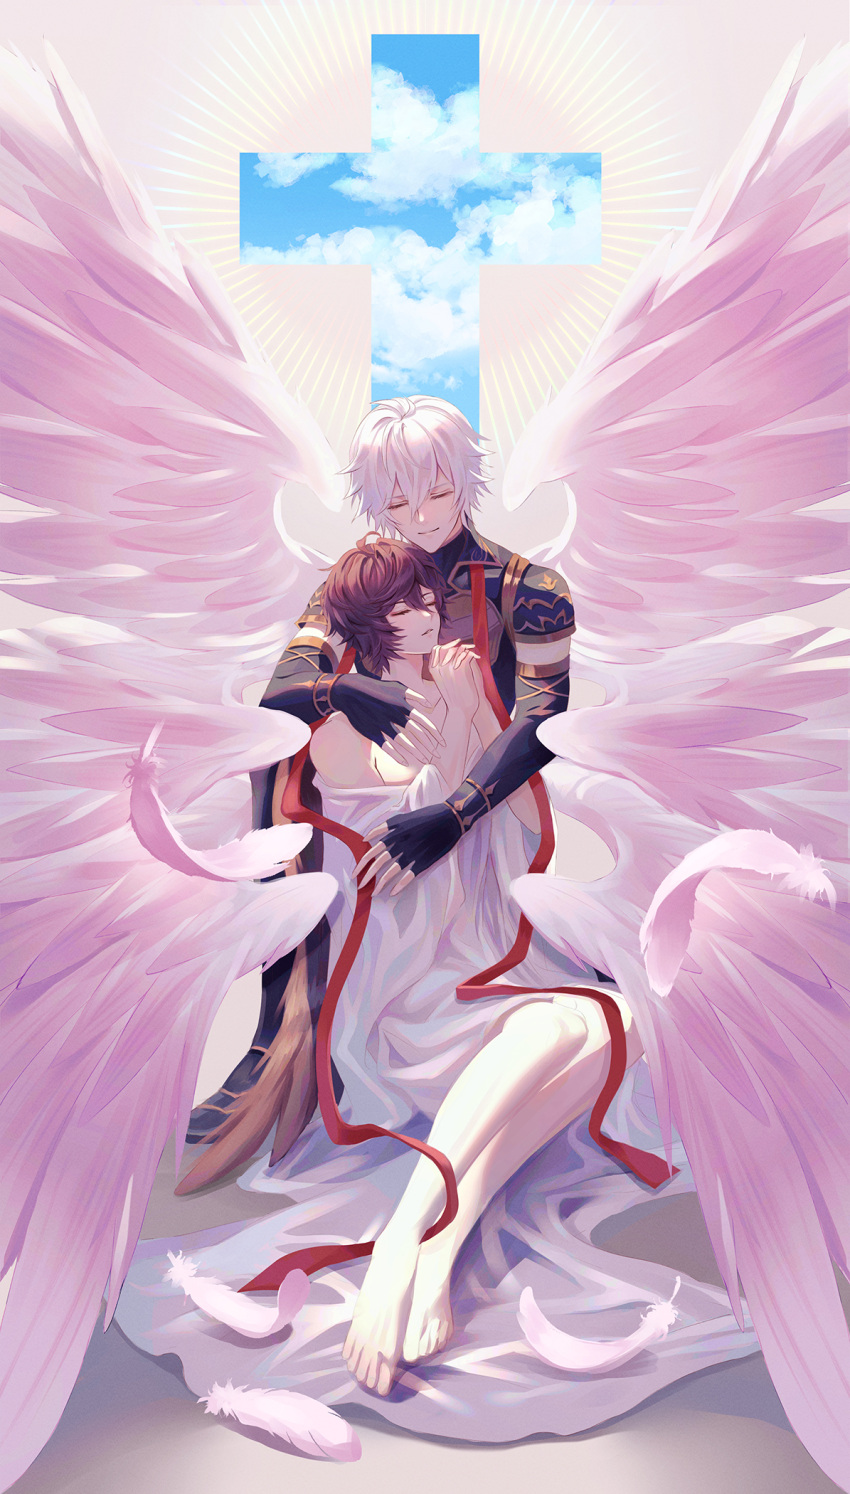 2boys ahoge barefoot bishounen brown_hair closed_eyes cloud cloudy_sky commentary commentary_request covering_with_blanket cross elbow_gloves feathered_wings feathers fingerless_gloves full_body gloves granblue_fantasy hair_between_eyes highres hug kakaki_28 kneeling lucifer_(shingeki_no_bahamut) male_focus messy_hair multiple_boys multiple_wings praying red_ribbon ribbon sandalphon_(granblue_fantasy) short_hair silhouette sitting sky white_feathers white_hair white_wings wings yaoi